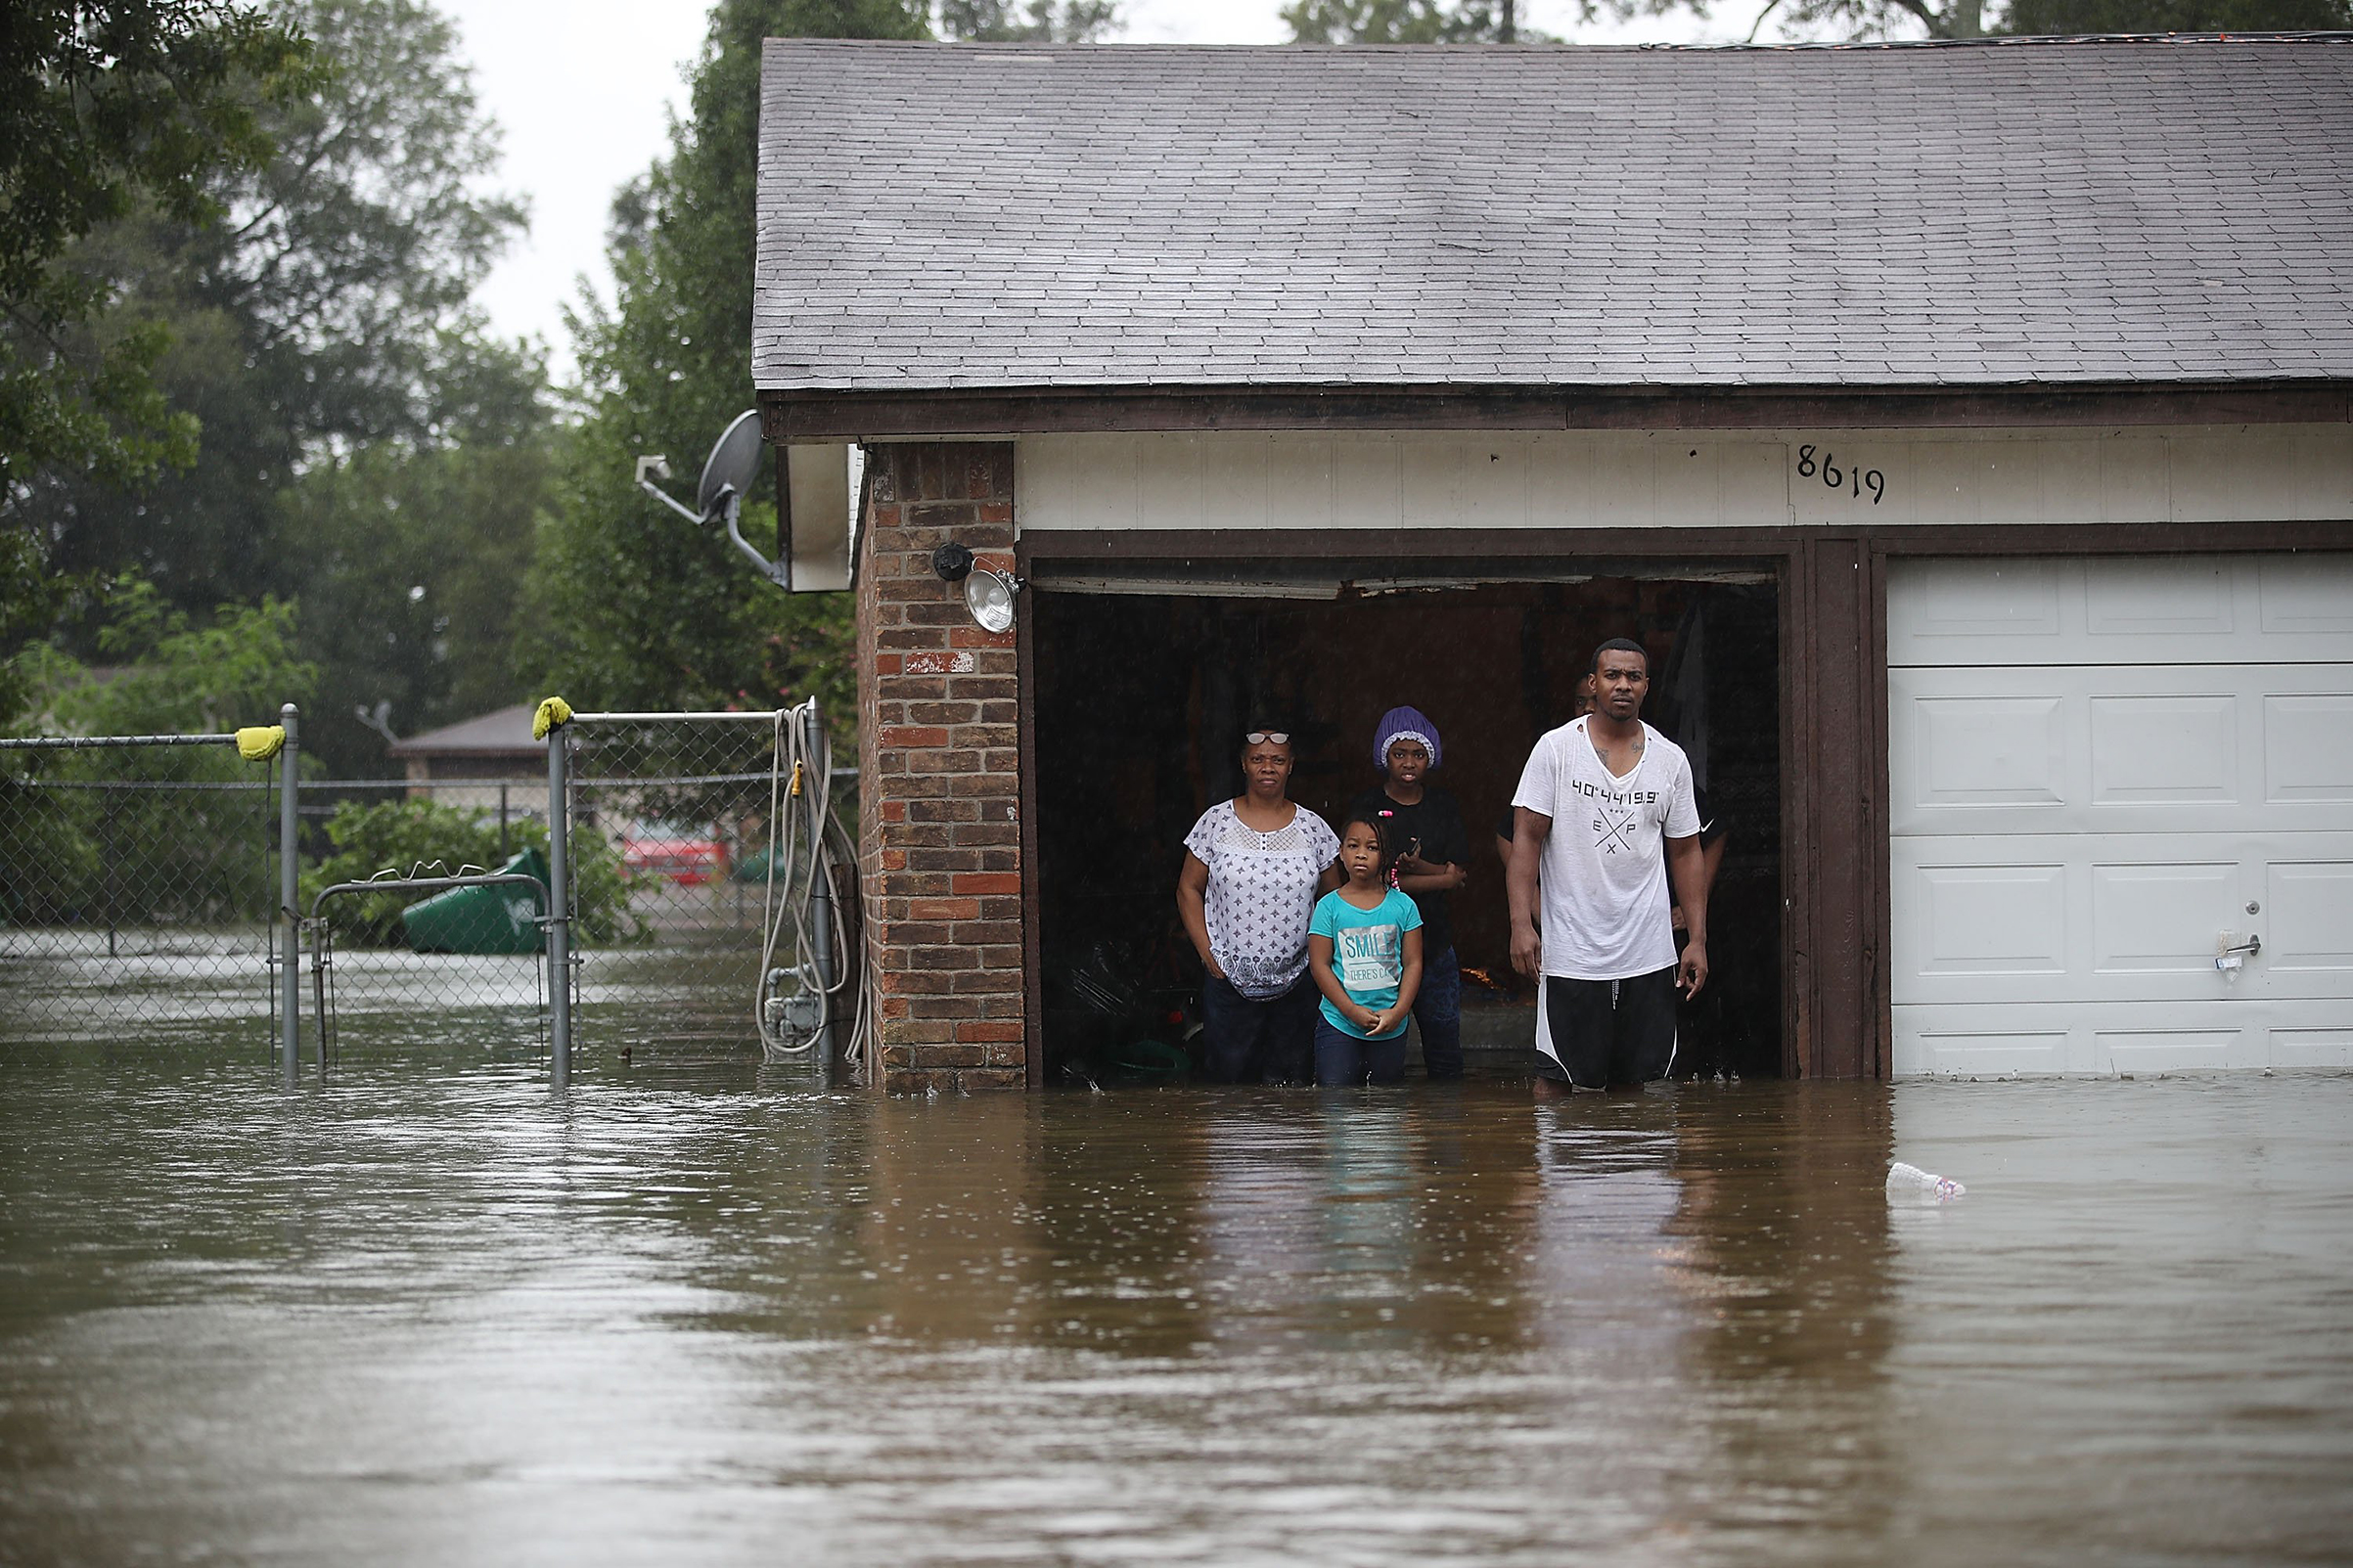 People wait to be rescued from their homes after the area was inundated with flooding from Hurricane Harvey on Aug. 28, 2017 in Houston.